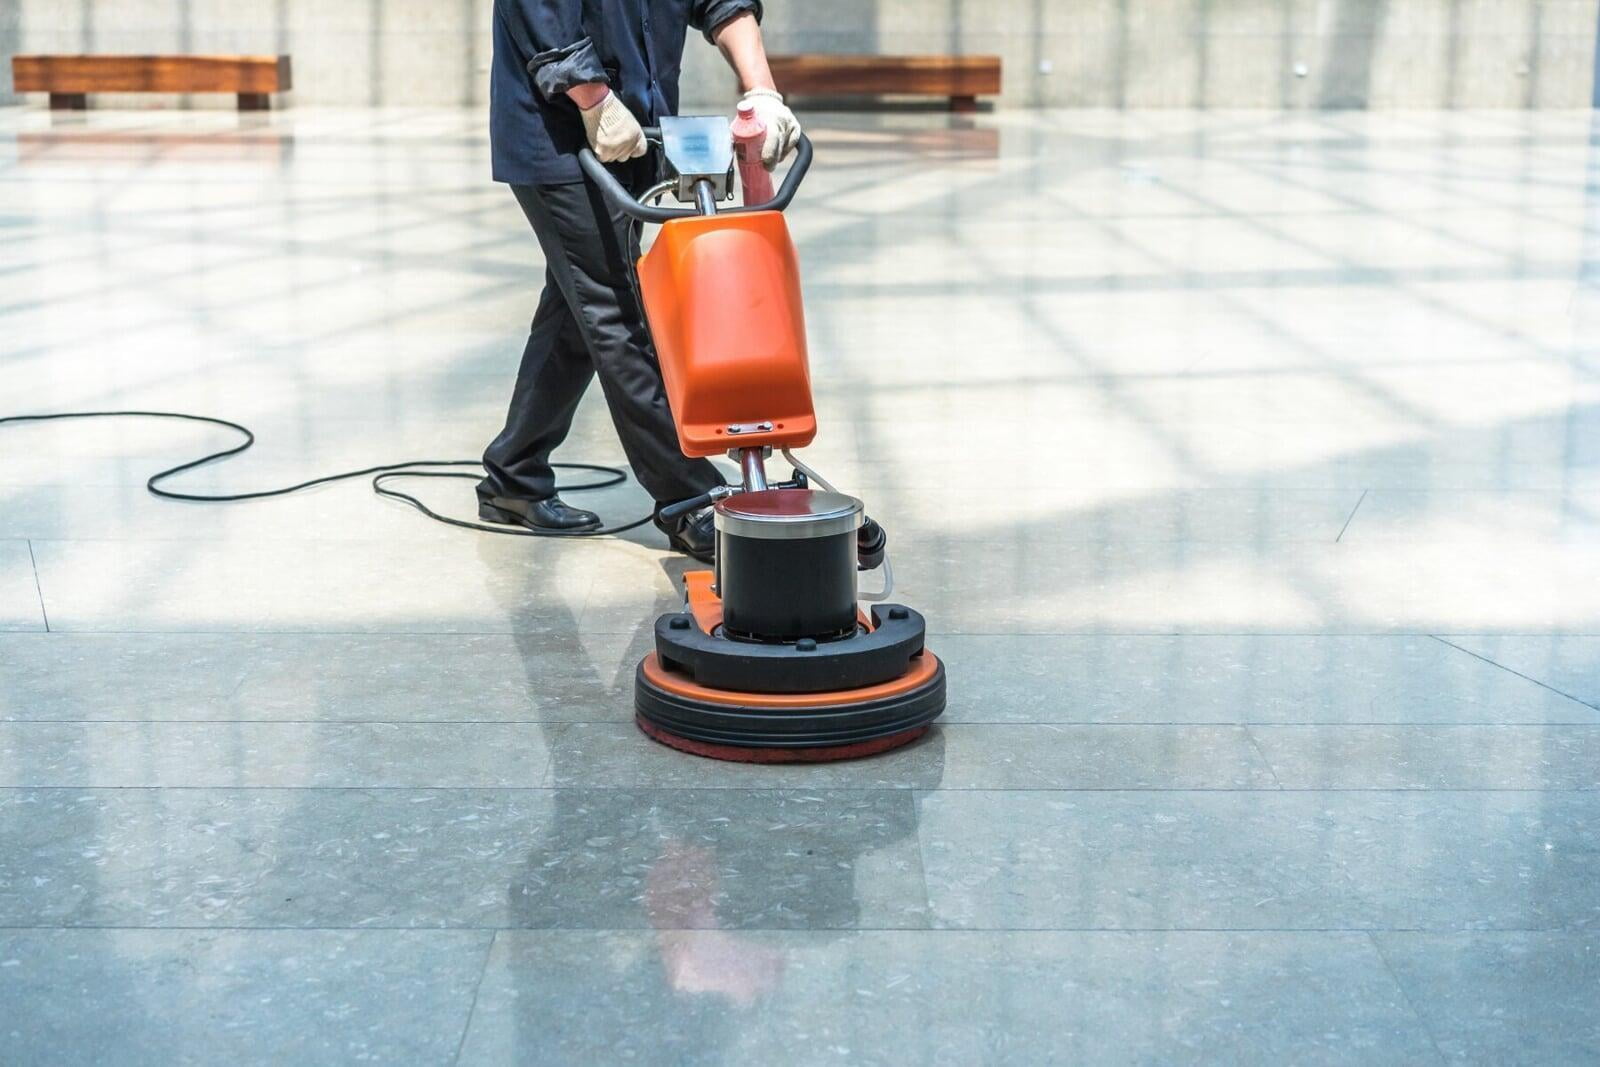 Why Stripping & Waxing Floors is Important?